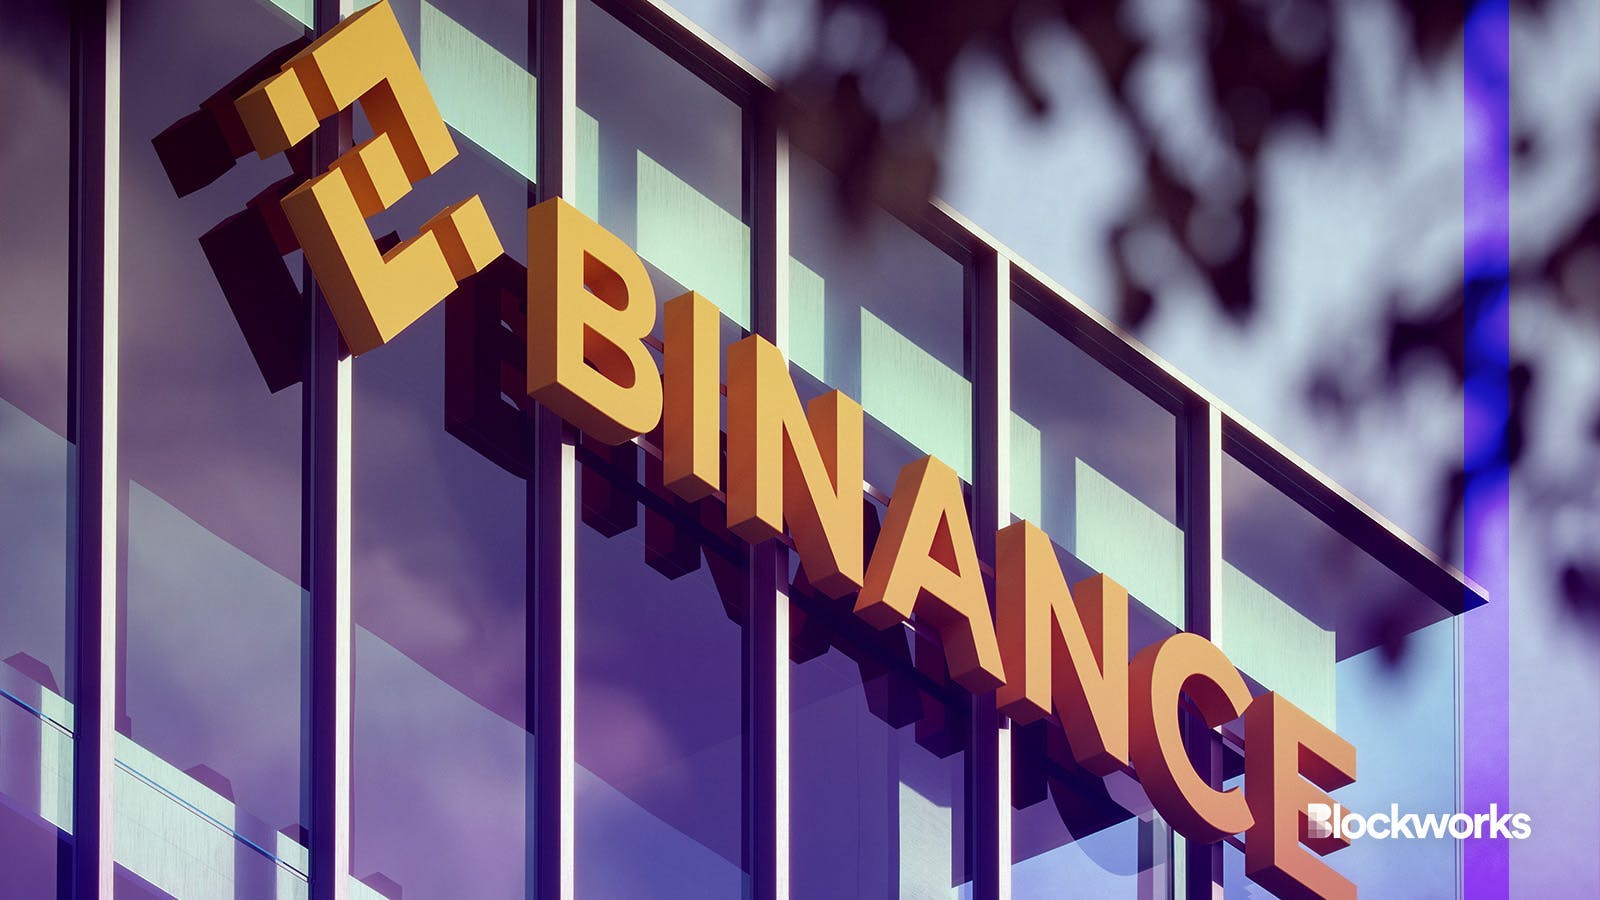 Nigerian Court Denies Bail for Binance Executive in $35 Million Money Laundering Trial on 40th Birthday